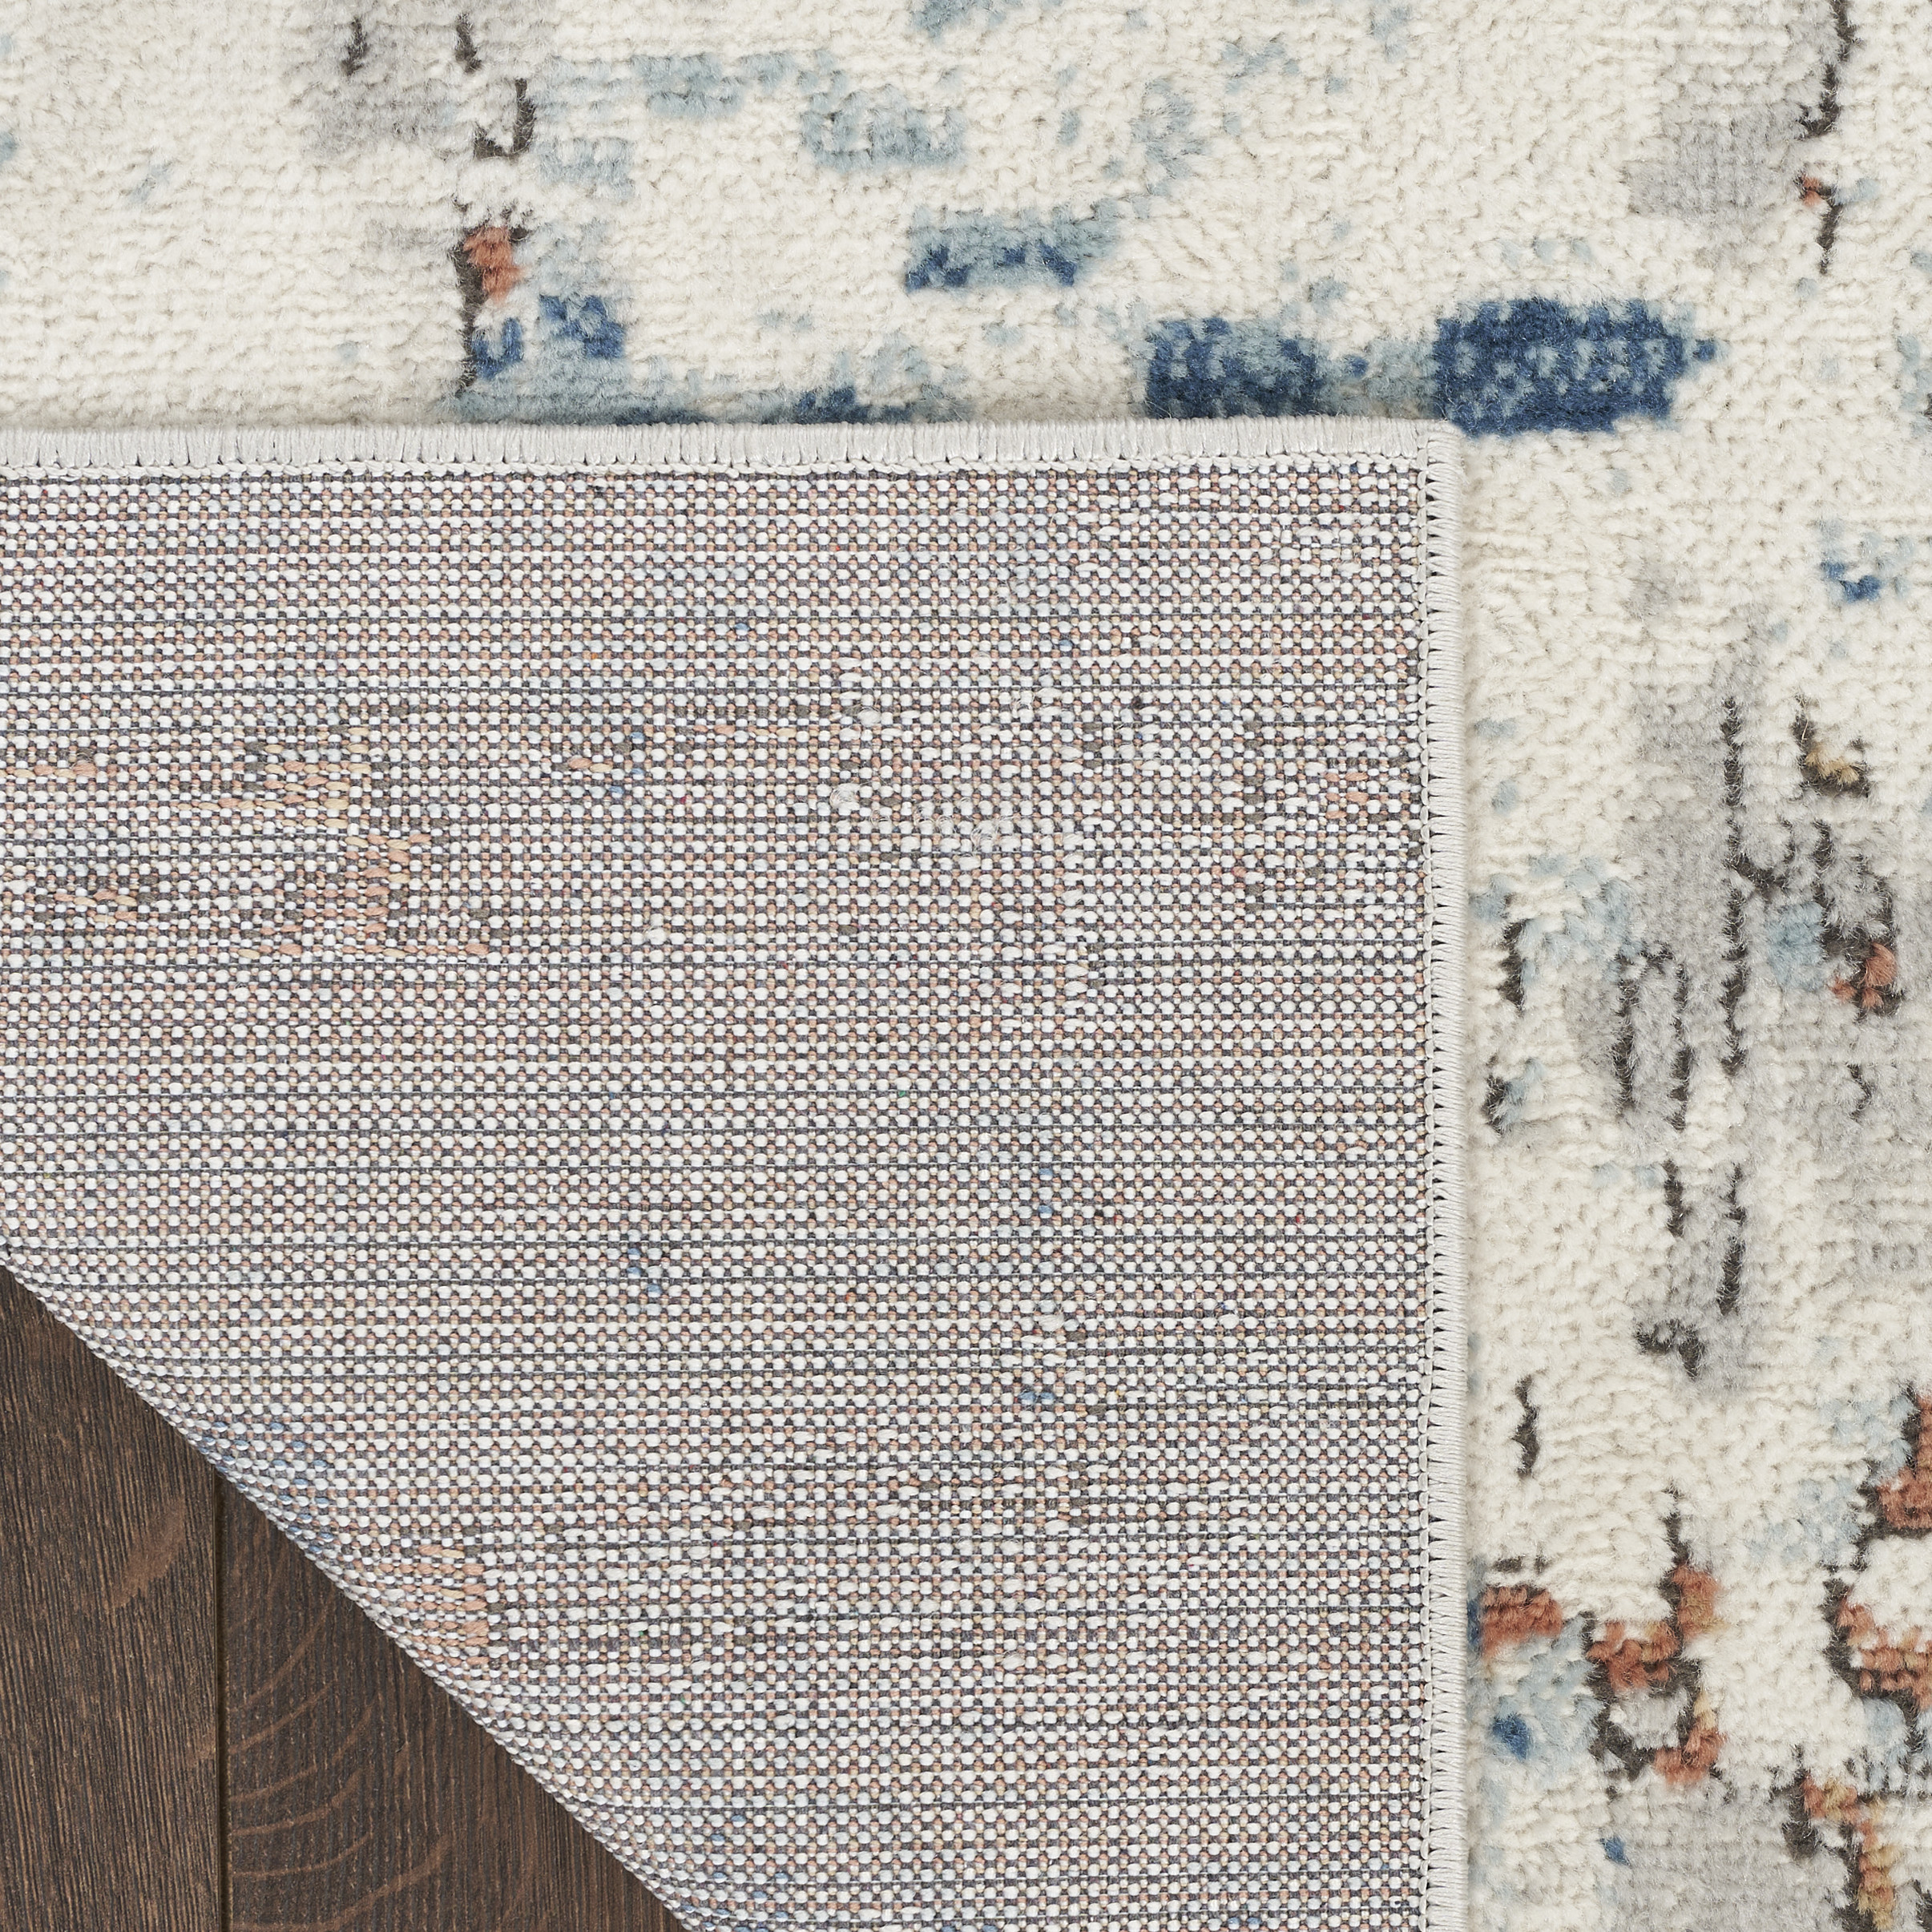 Nourison Concerto Abstract Beige Blue Rust 5'3" x 7'3" Area Rug, (5x7) - image 5 of 8